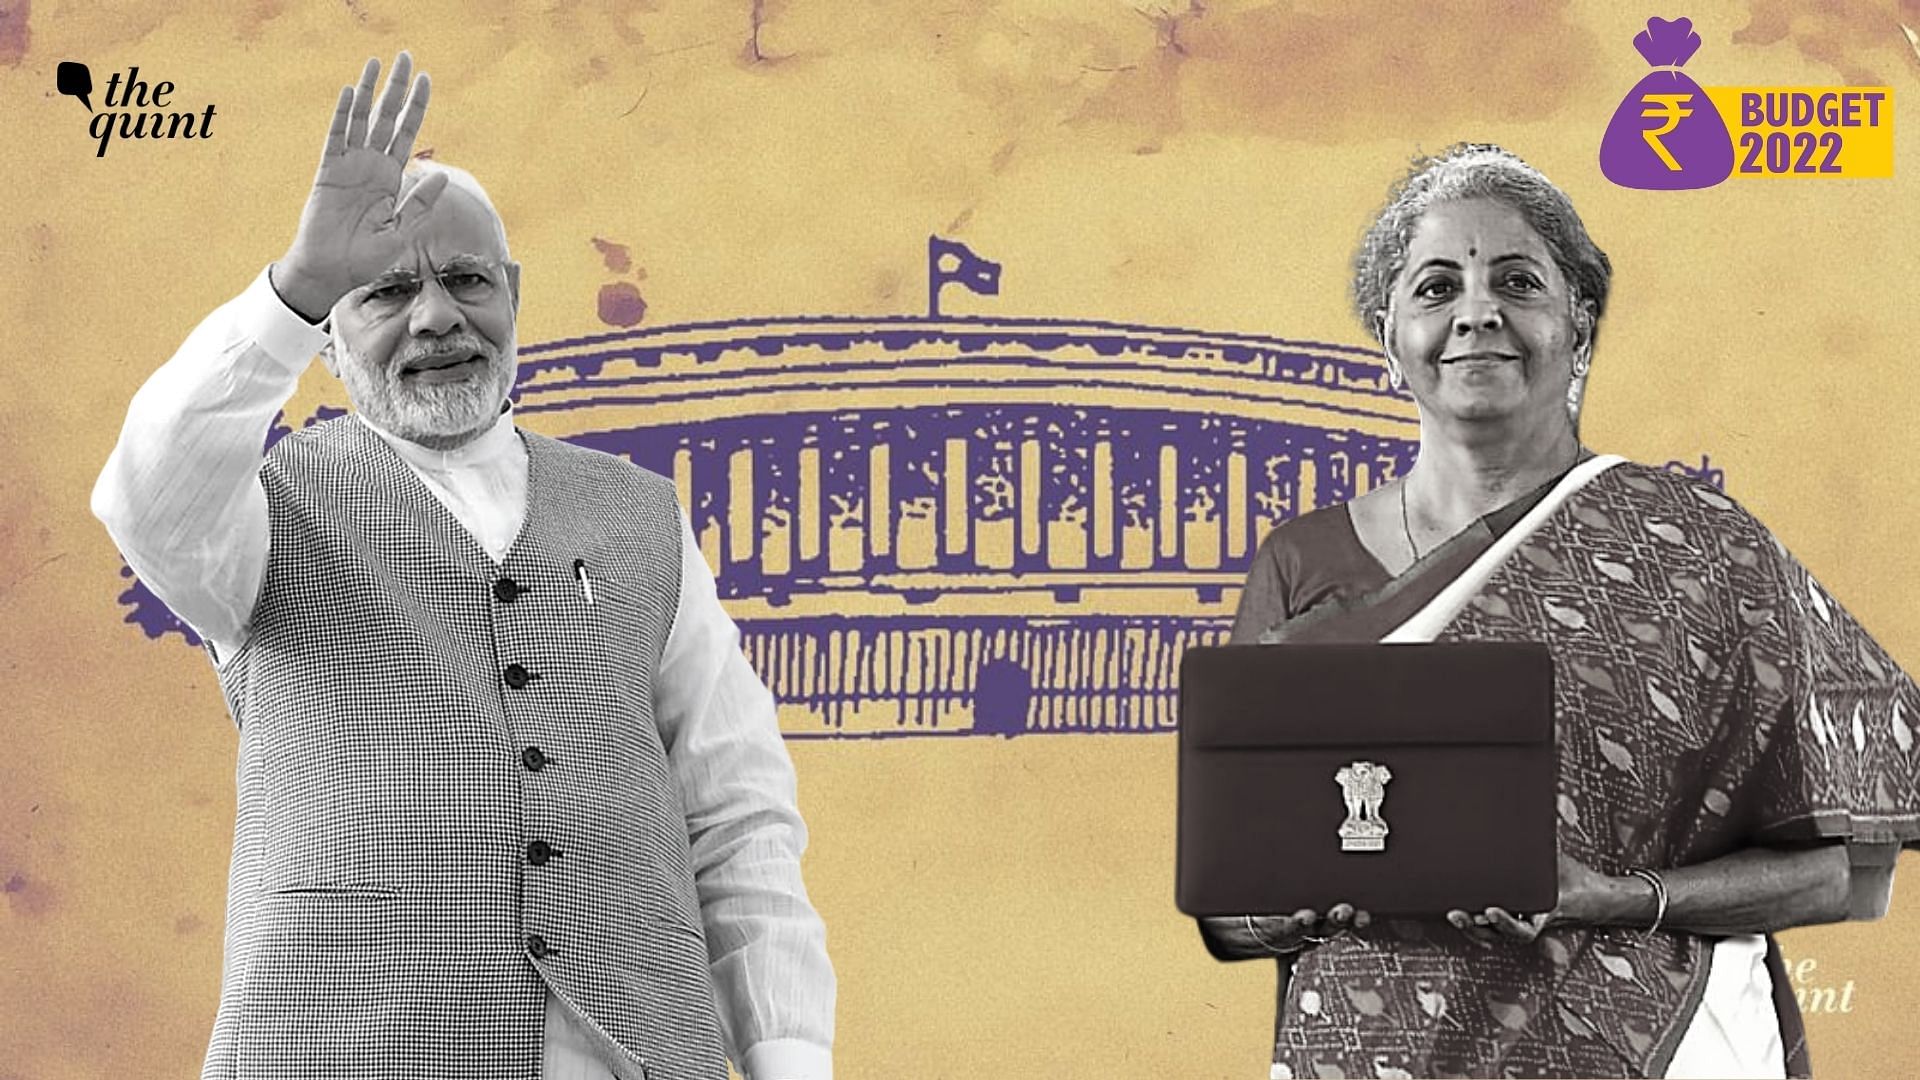 <div class="paragraphs"><p>The <a href="https://www.thequint.com/news/india/union-budget-2022-highlights-finance-minister-nirmala-sitharaman-speech">Union Budget 2022</a> began with the finance minister acknowledging the lives affected by the grave impacts of the pandemic and the need to rebound, recover, and build a resilient India. We are moving on from a difficult year, but the strength and compassion our country showed gives us hope for a positive recovery.</p></div>